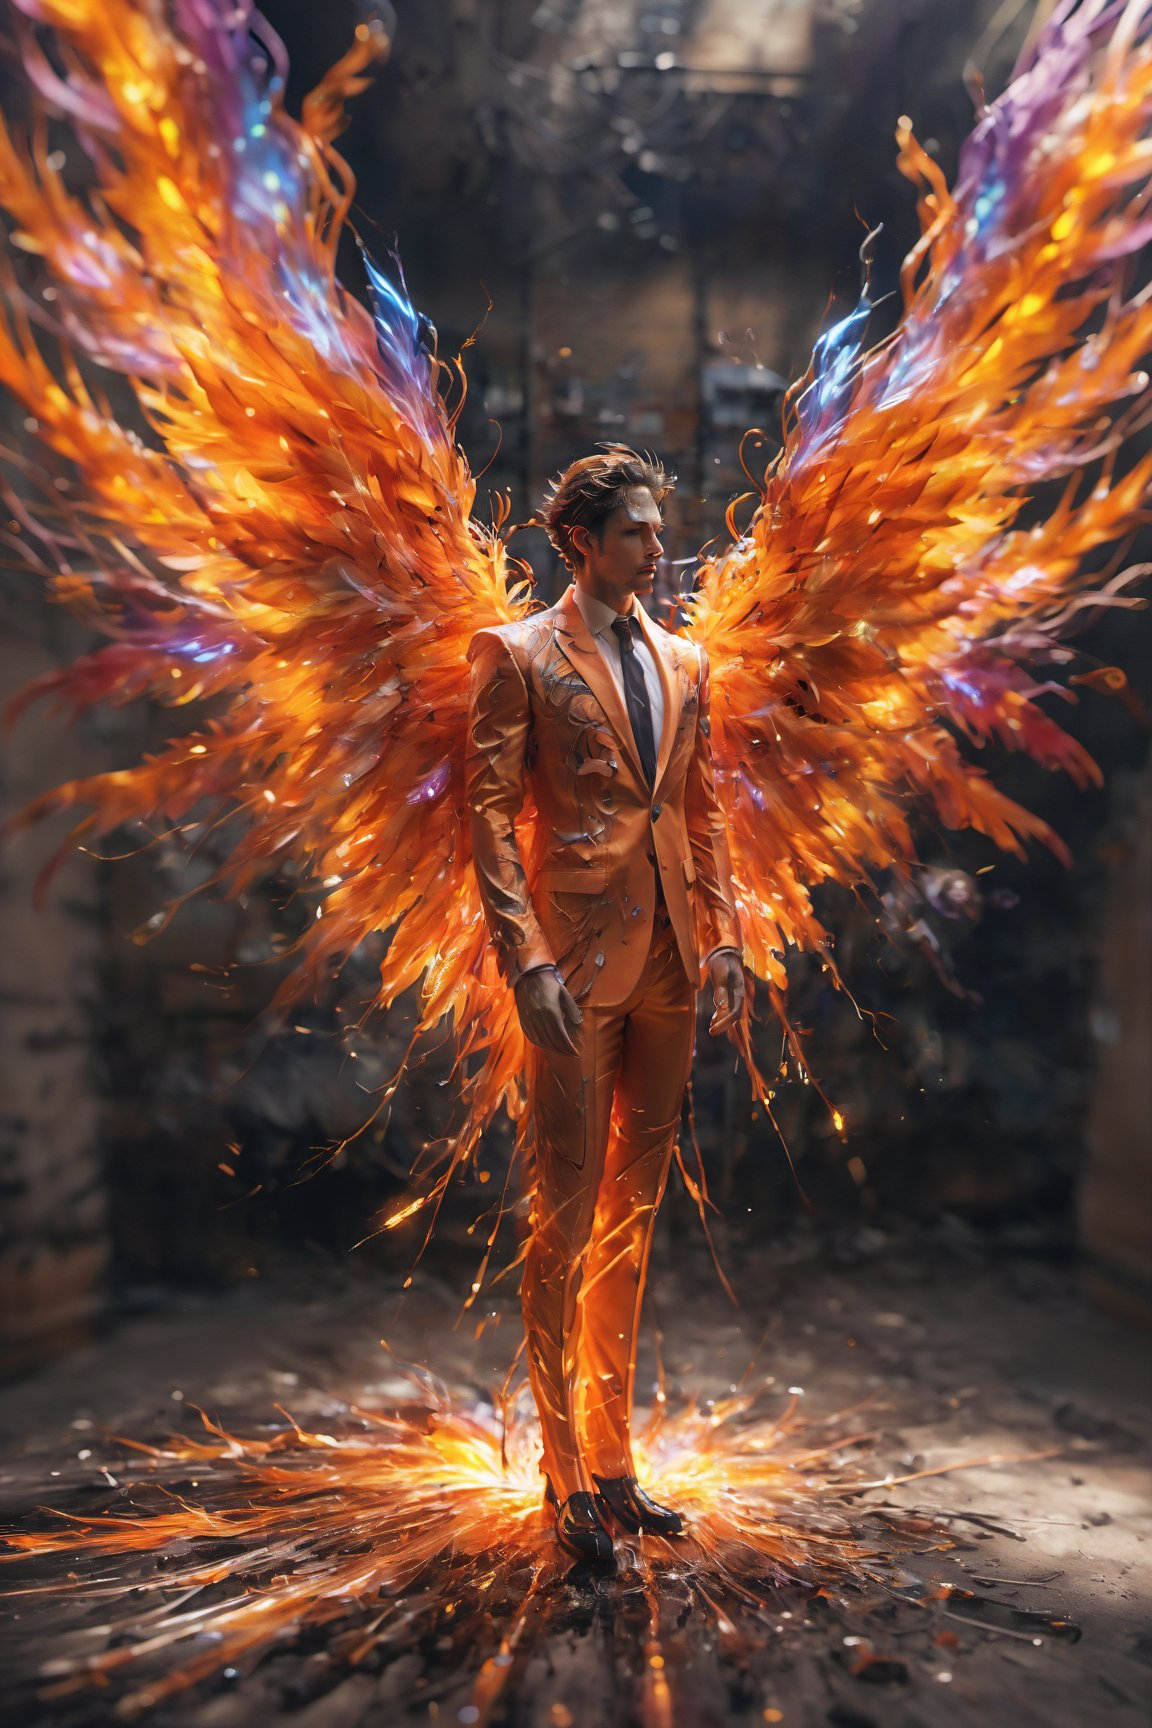 Create an image of a young man wearing a suit, featuring vibrant, thunder wings extending from his back. Random movement The background should be plain white, emphasizing the contrast and detailing of the beauty wings and the sharpness of the suit. The man should appear poised and elegant, with the wings unfurled to showcase a spectrum of vivid hues, blending seamlessly from one color to another. The focus should be on the meticulous details of the wings’ feathers and the suit’s fabric, capturing a harmonious blend of natural and refined elements, wings,Stylish, close up,l3min,xxmixgirl,fire element,wings,ice and water,composed of elements of thunder,thunder,electricity